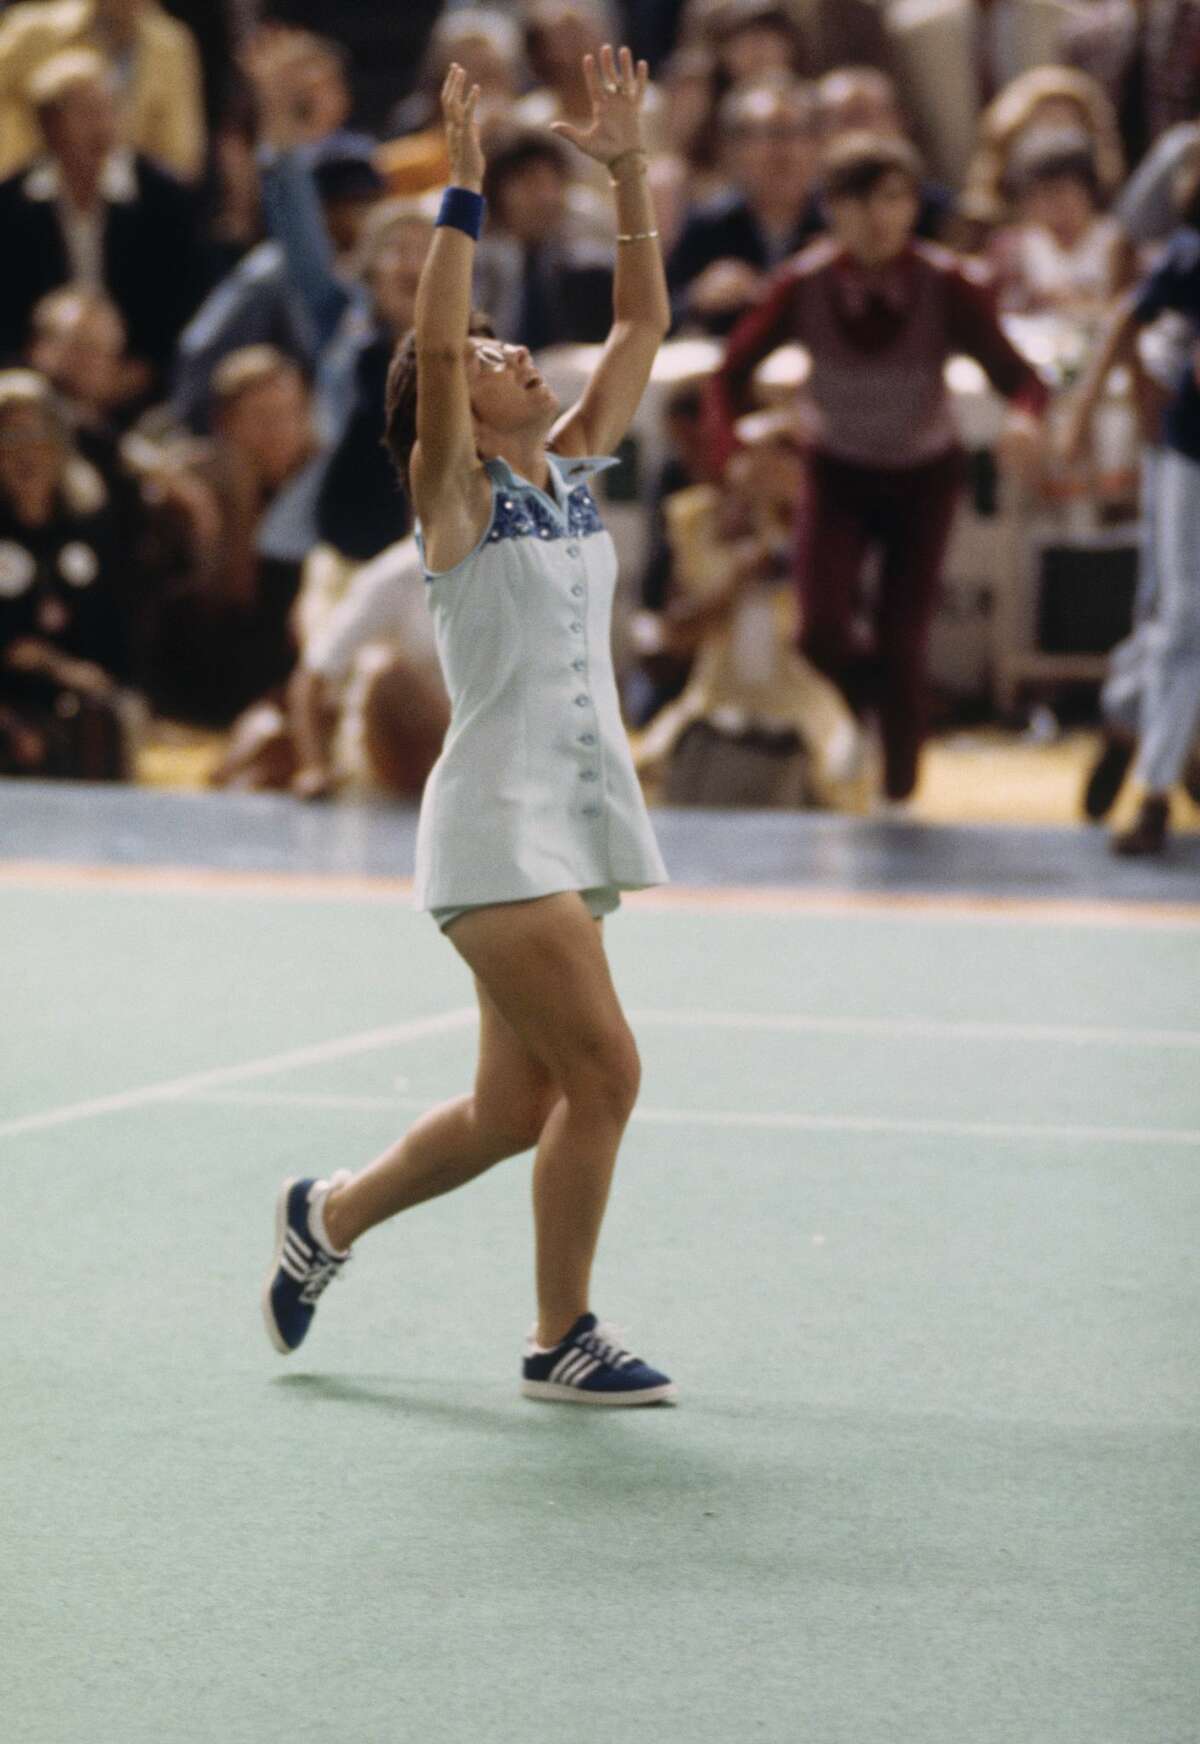 Billie Jean King raises her hands in triumph after defeating Bobby Riggs in the "Battle of the Sexes" Challenge Match at the Astrodome on September 20, 1973 in Houston, Texas. (Photo by Focus on Sport/Getty Images)